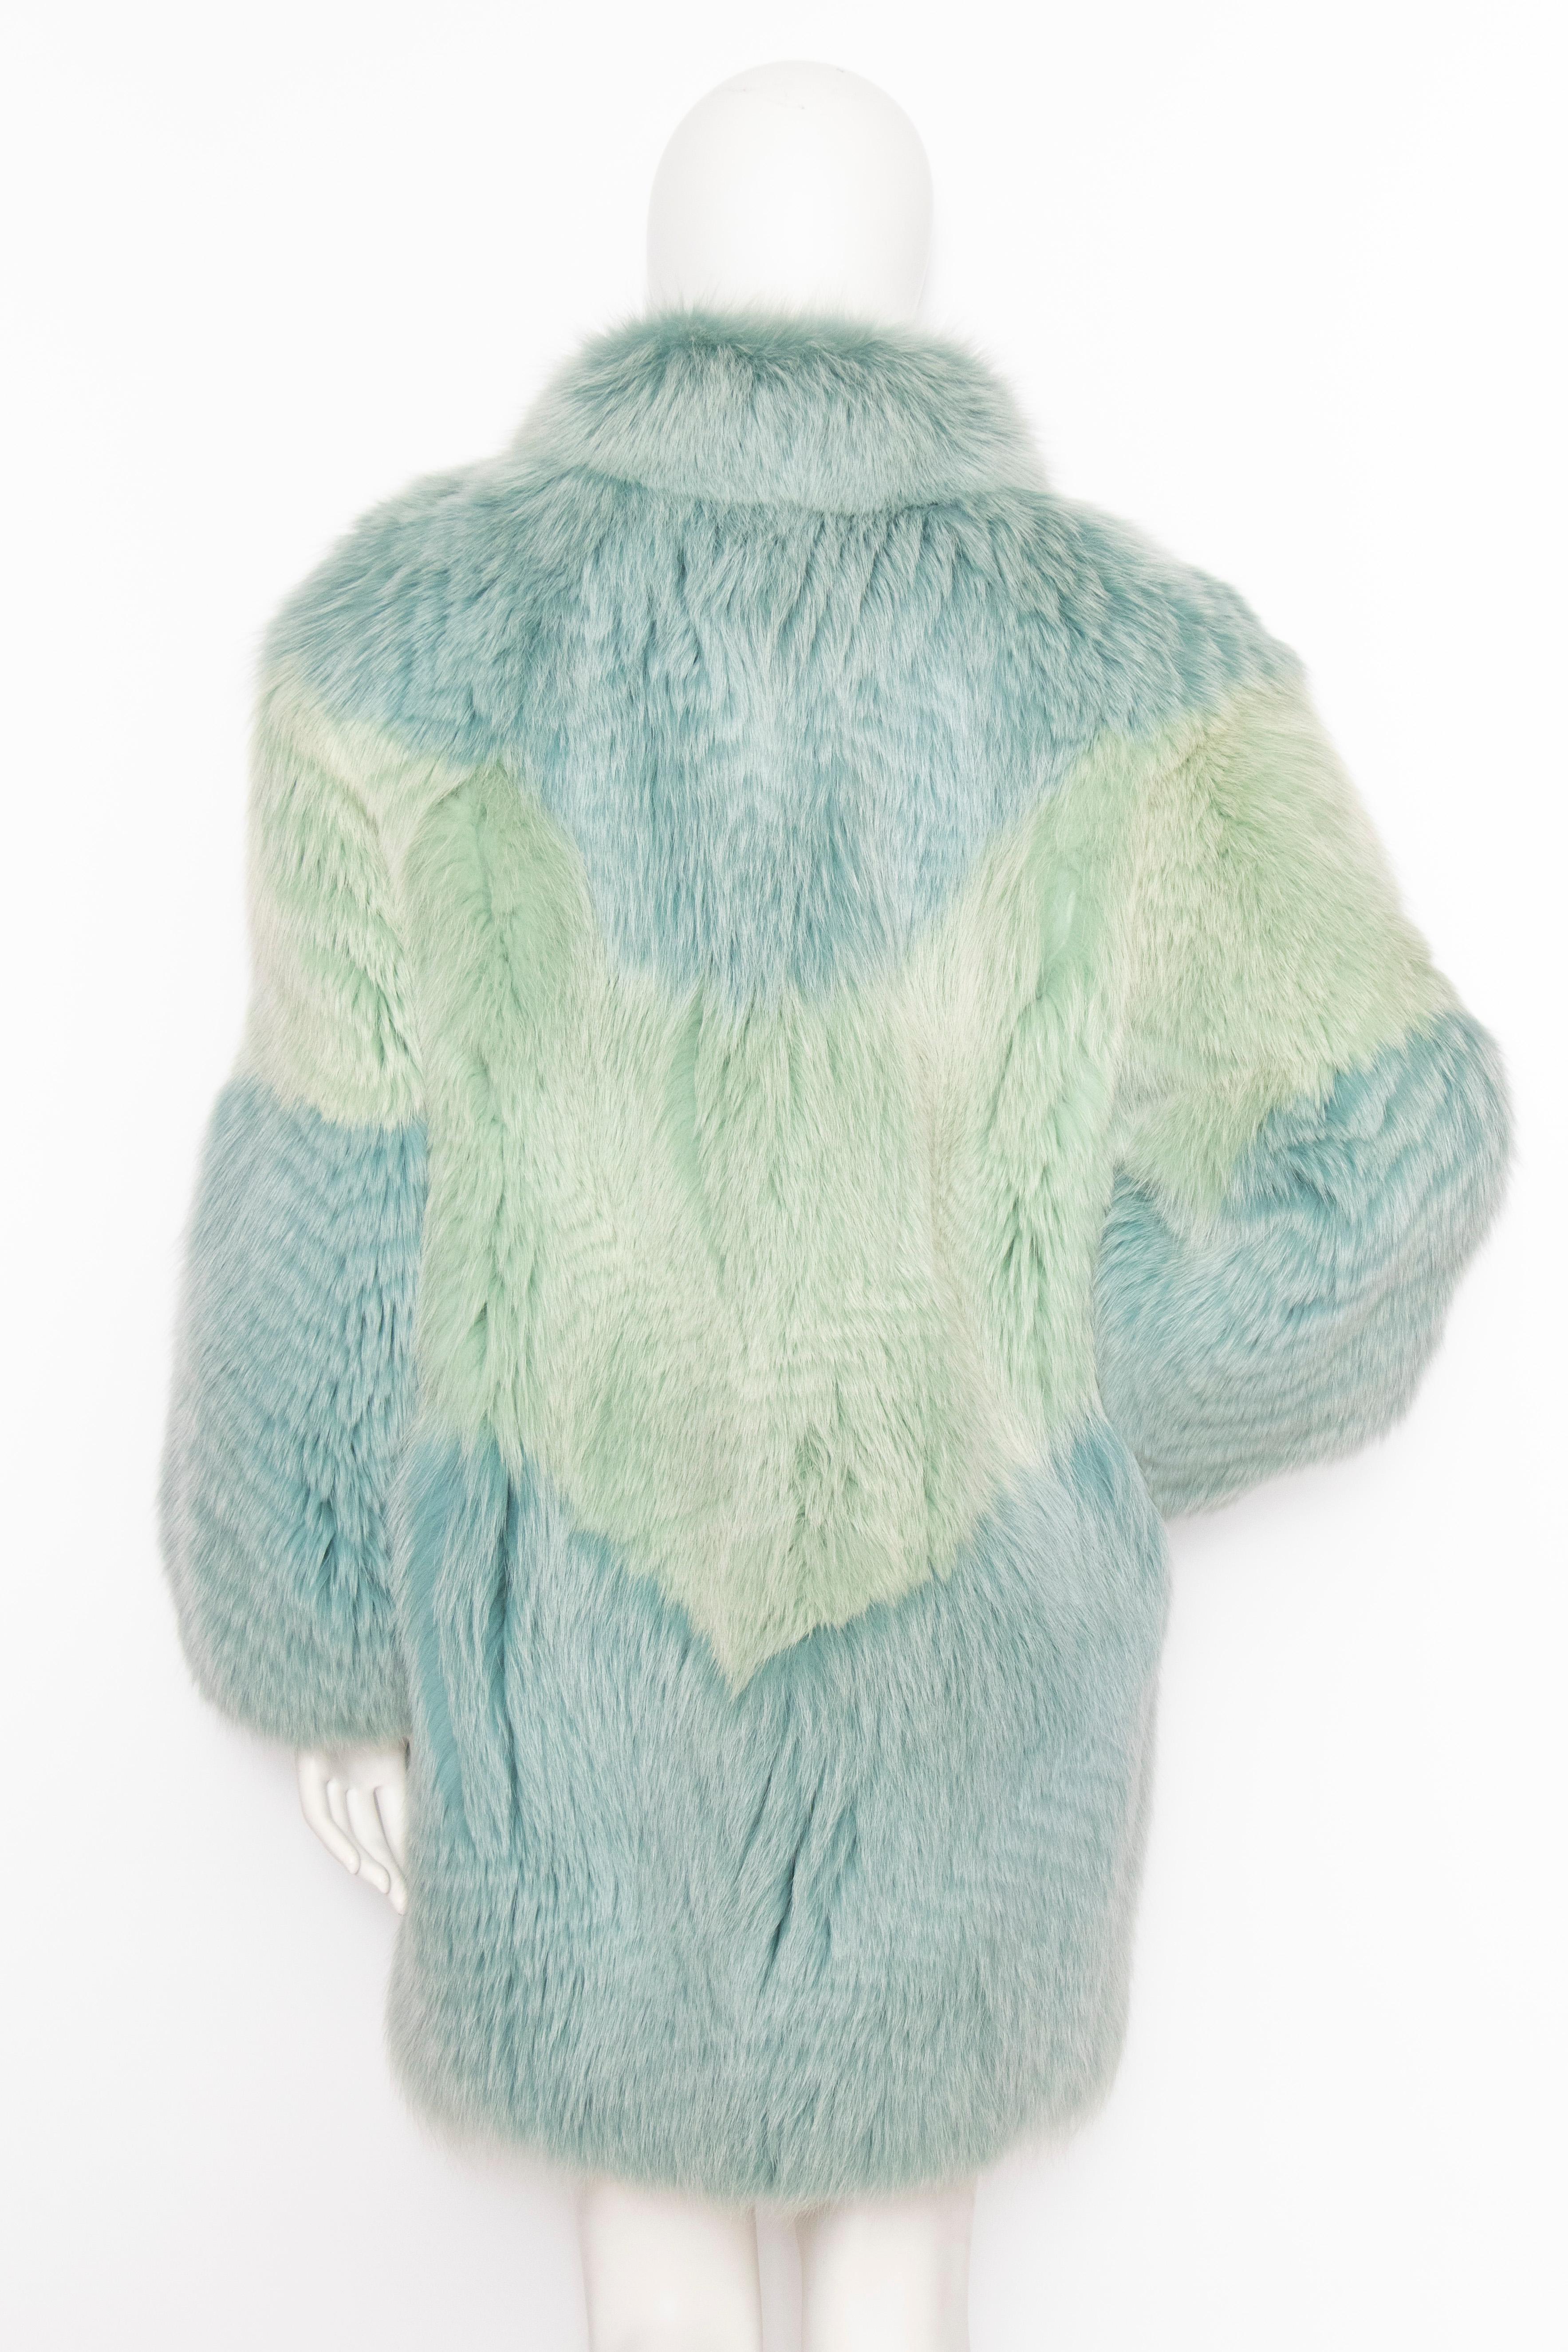 A fabulously extravagant 1980s dyed fox fur coat with great volume and hook closure in front. The stunning colour combines mint green and blue. The coat is fully lined and has side pockets. 

The size of the coat corresponds to a modern size medium,